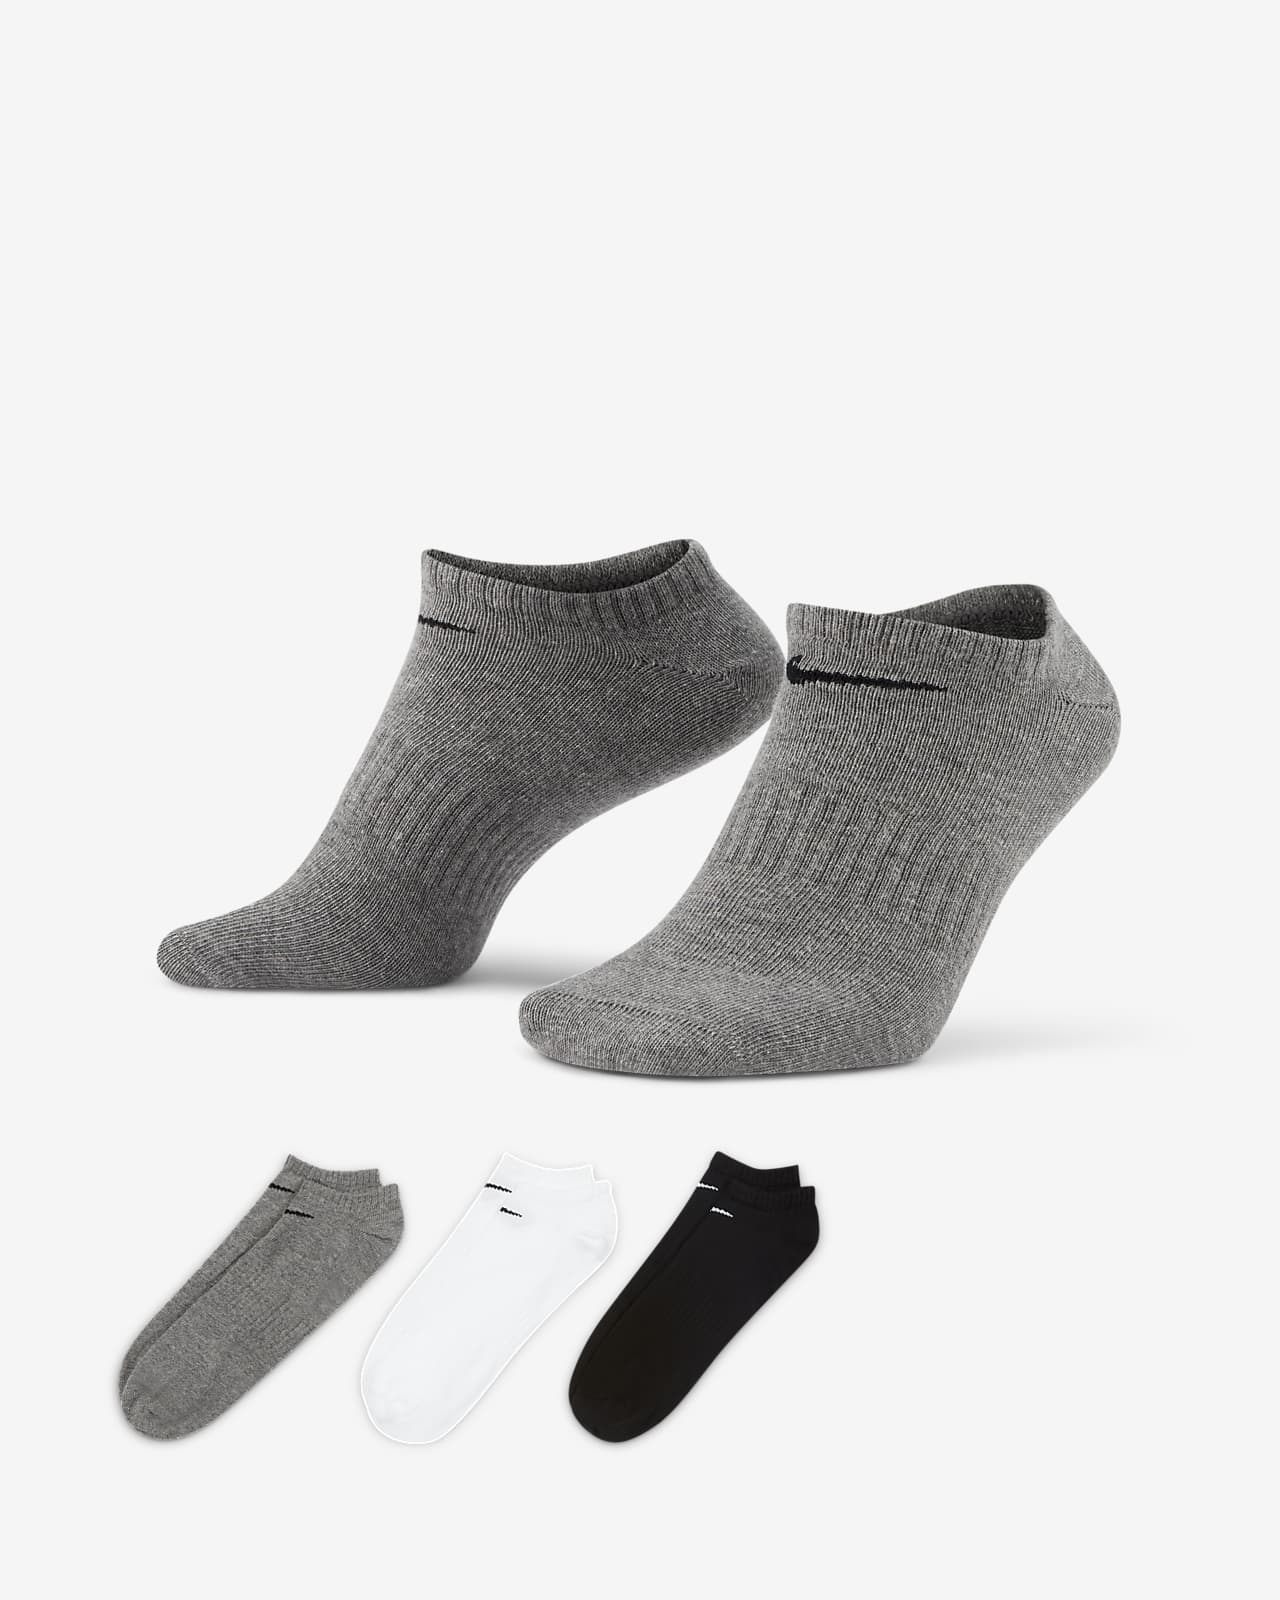 Chaussettes de training invisibles Nike Everyday Lightweight (3 paires)